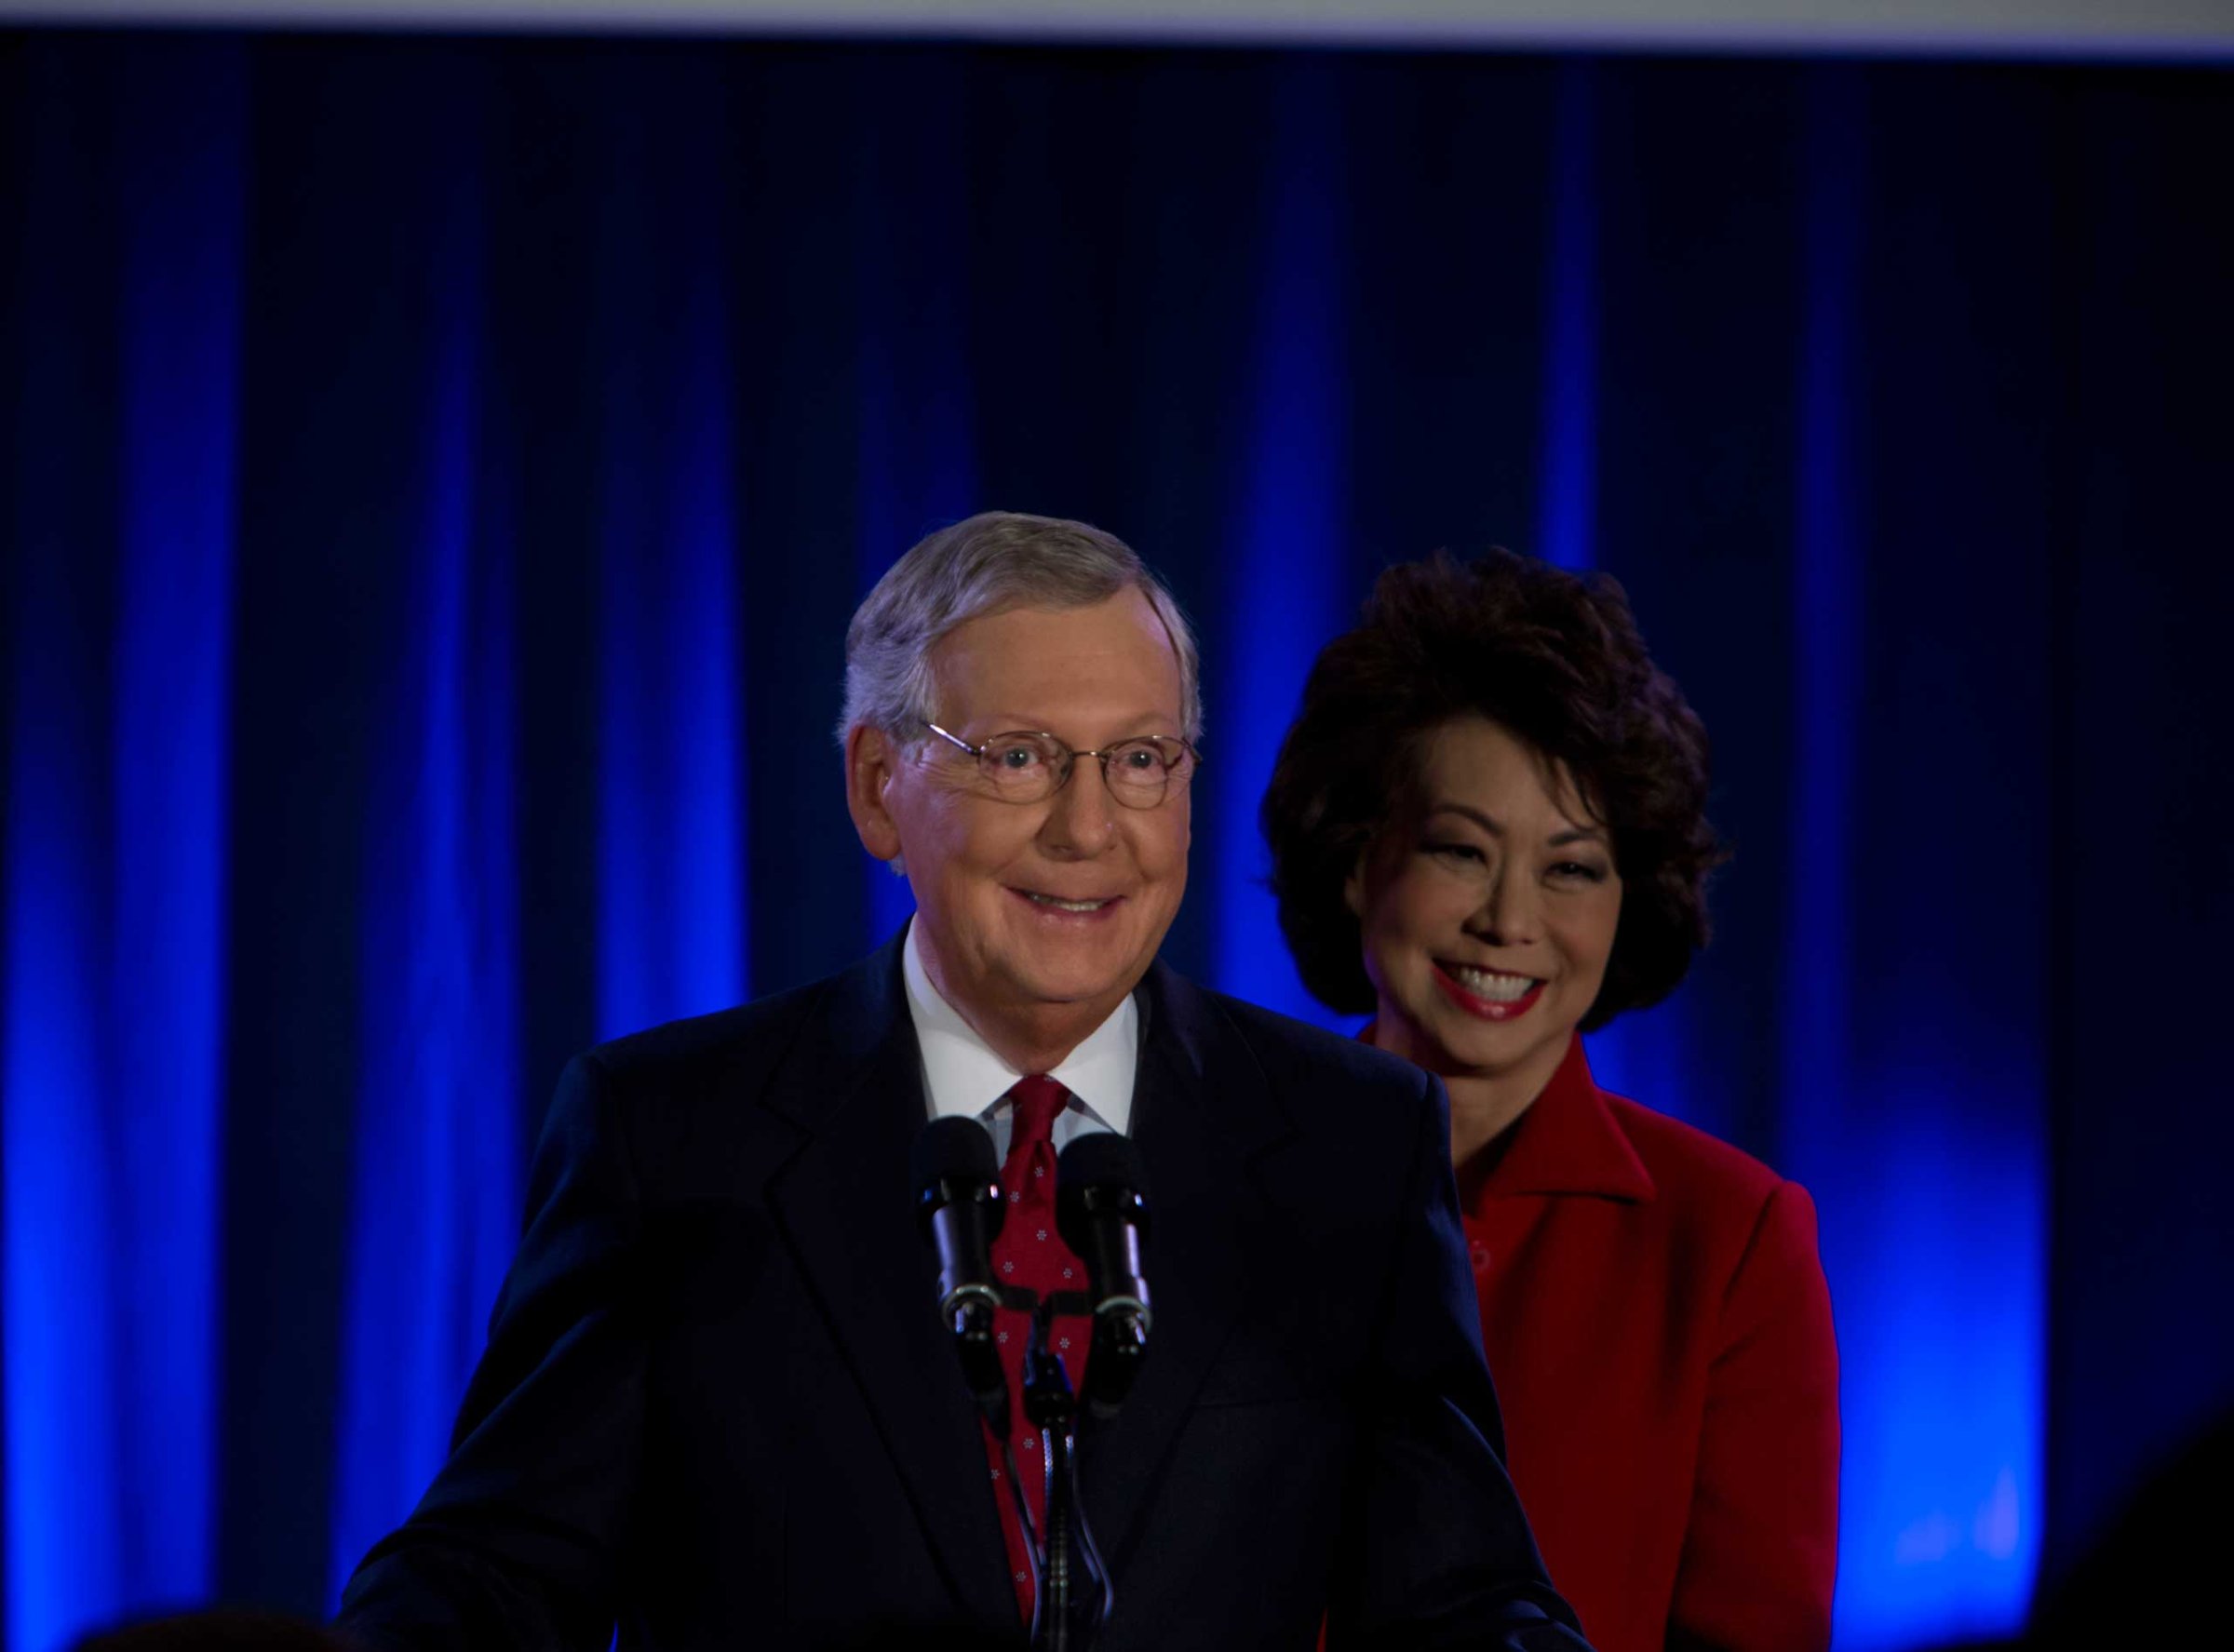 Senator Mitch McConnell with his wife Elaine Chao on election night, Nov. 4, 2014.